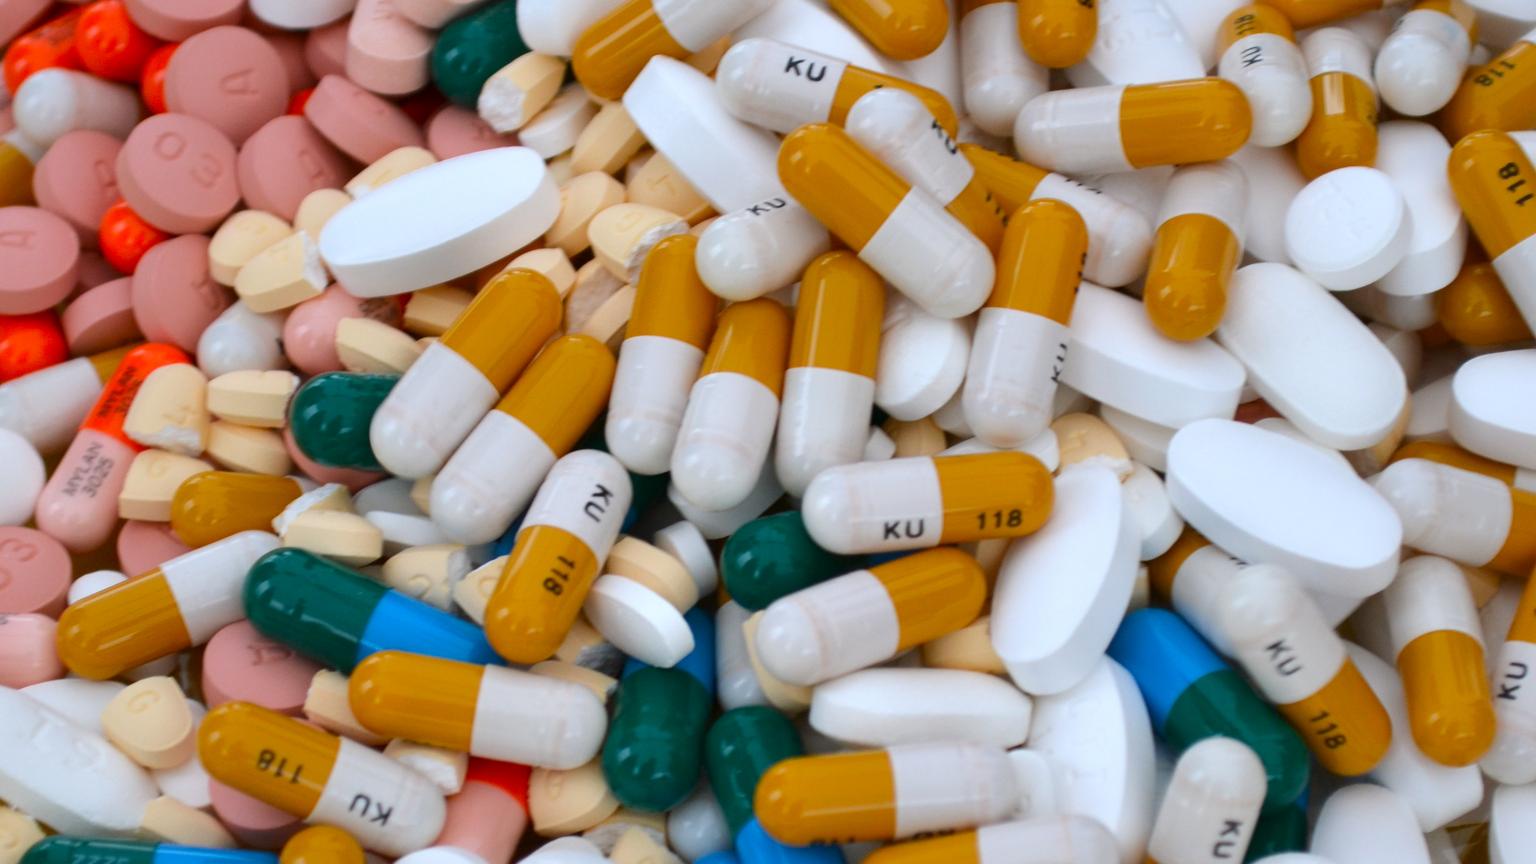 October 3, 2015- Overview of Pain Medication Take-Back Event | Pain